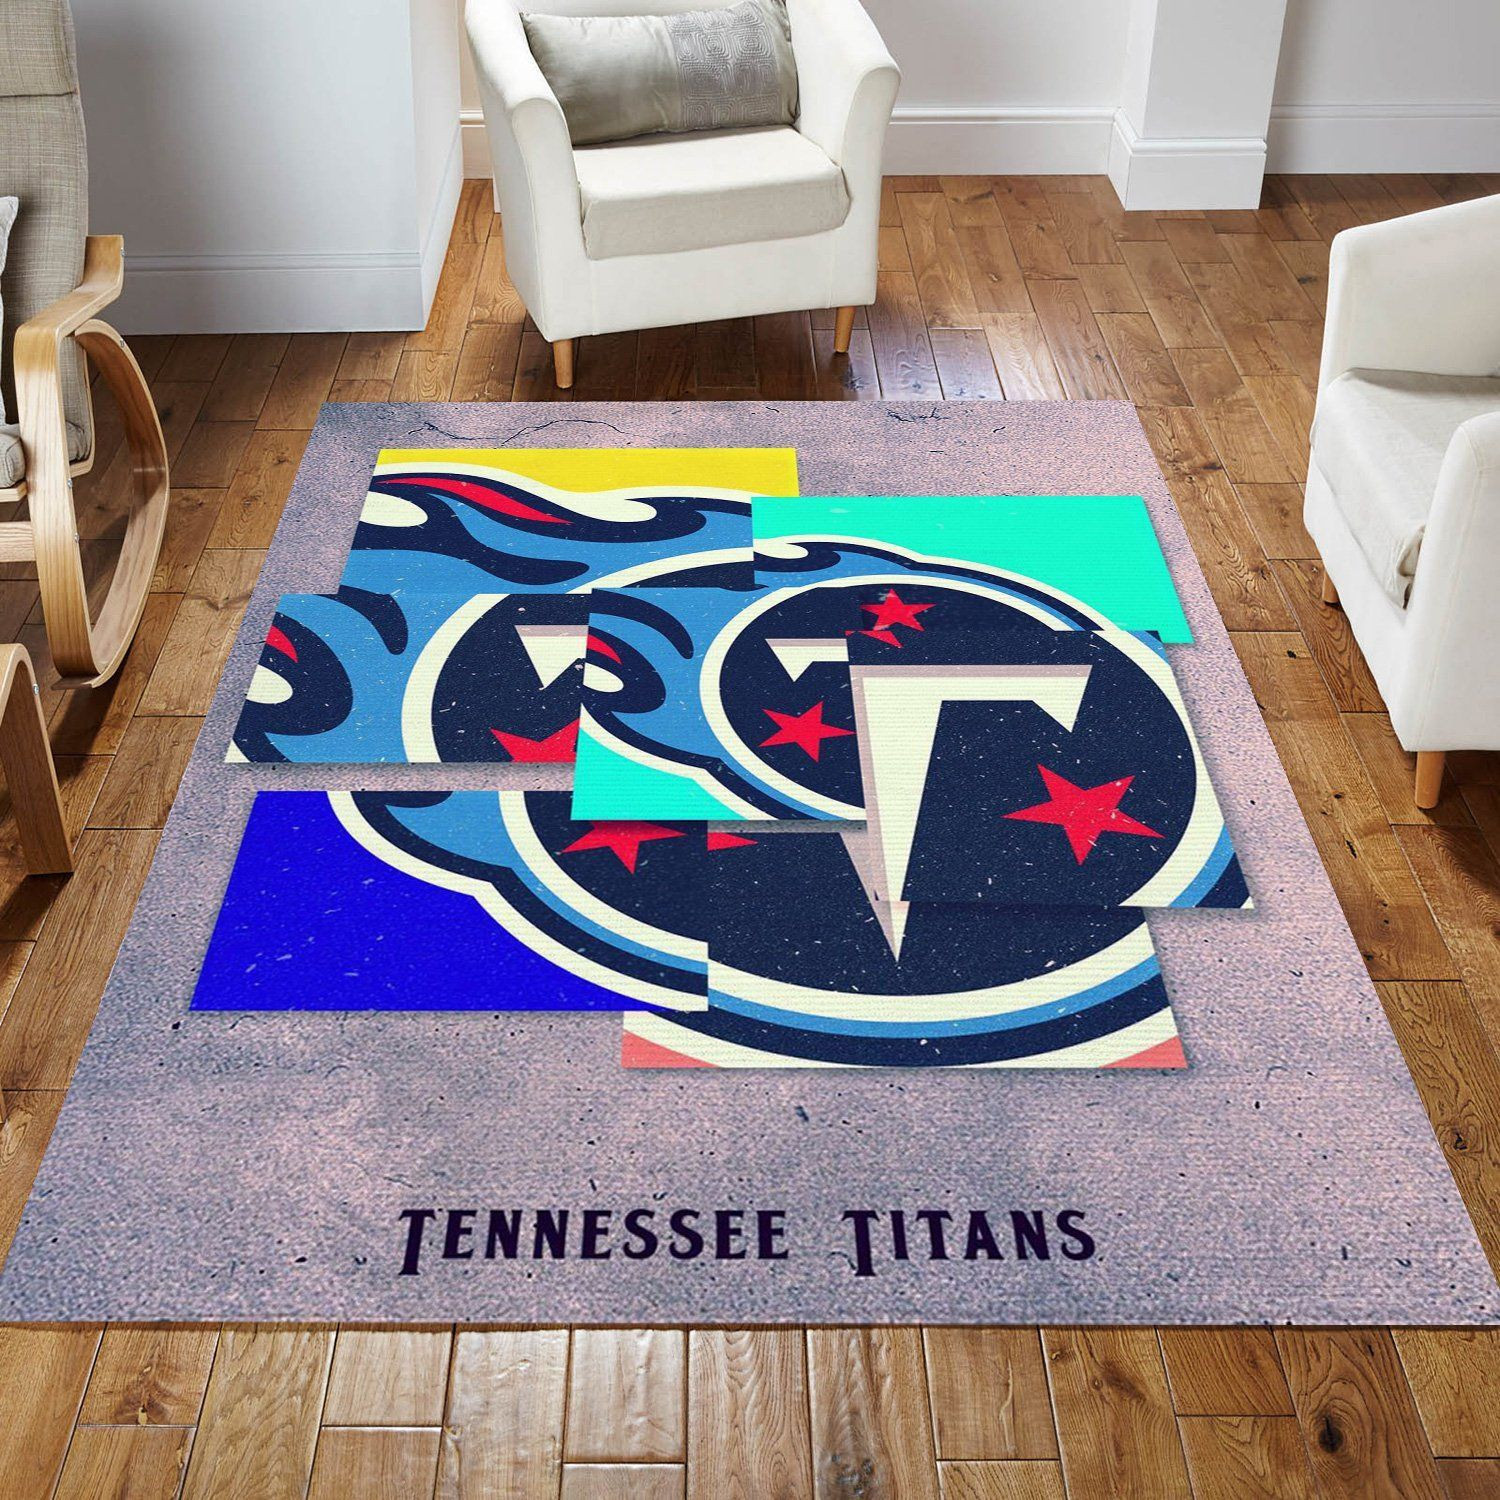 Tennessee Titans NFL Area Rug For Christmas Living Room Rug Christmas Gift US Decor - Indoor Outdoor Rugs 3